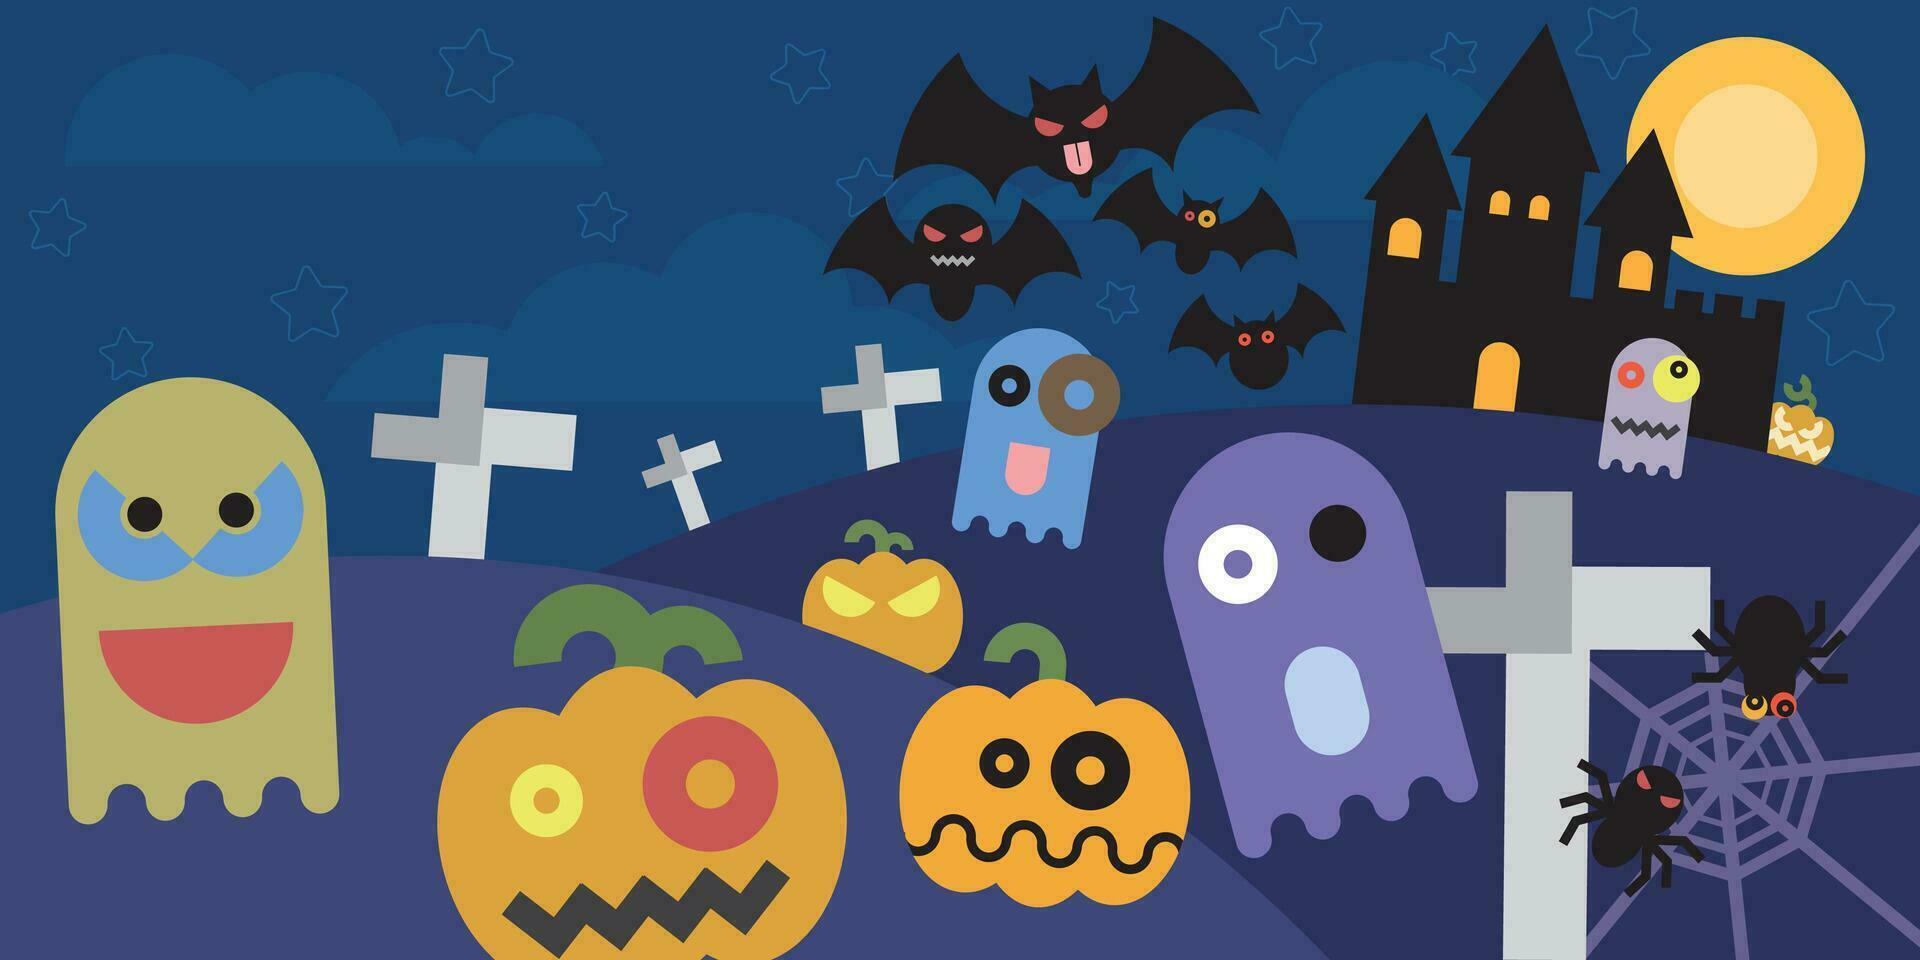 Halloween vector illustration with bats, full moon, ghost, pumpkins, spider, and haunted house. Halloween concept from geometric shape vivid colors.